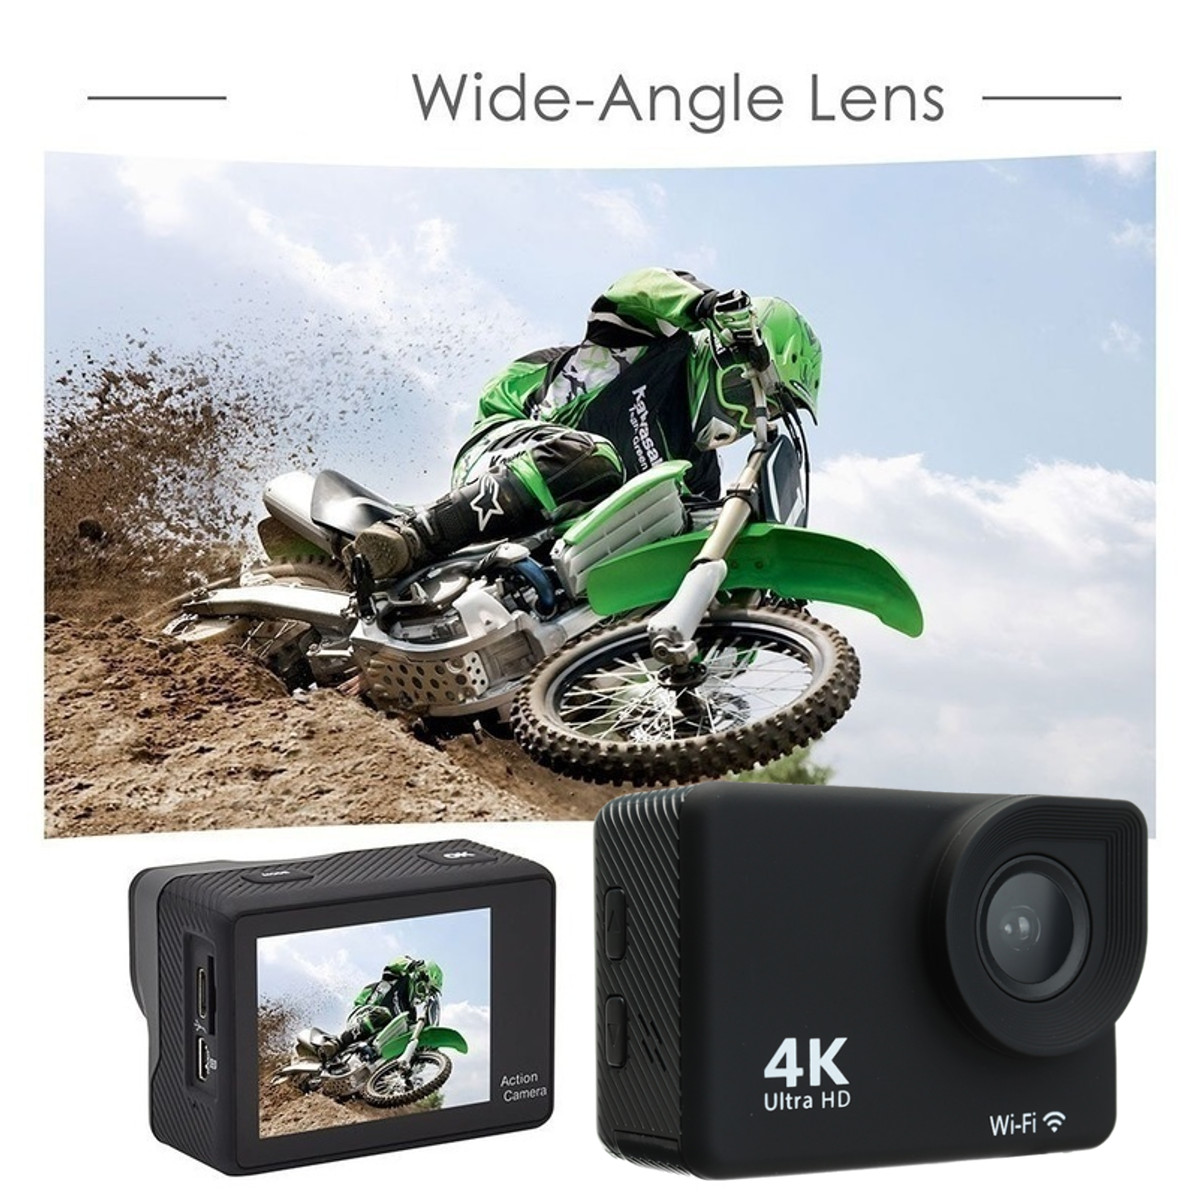 2-Inch-4K-Ultra-FHD-1080P-Double-Screen-Waterproof-Sport-Action-Camera-with-WiFi-Connection-1340529